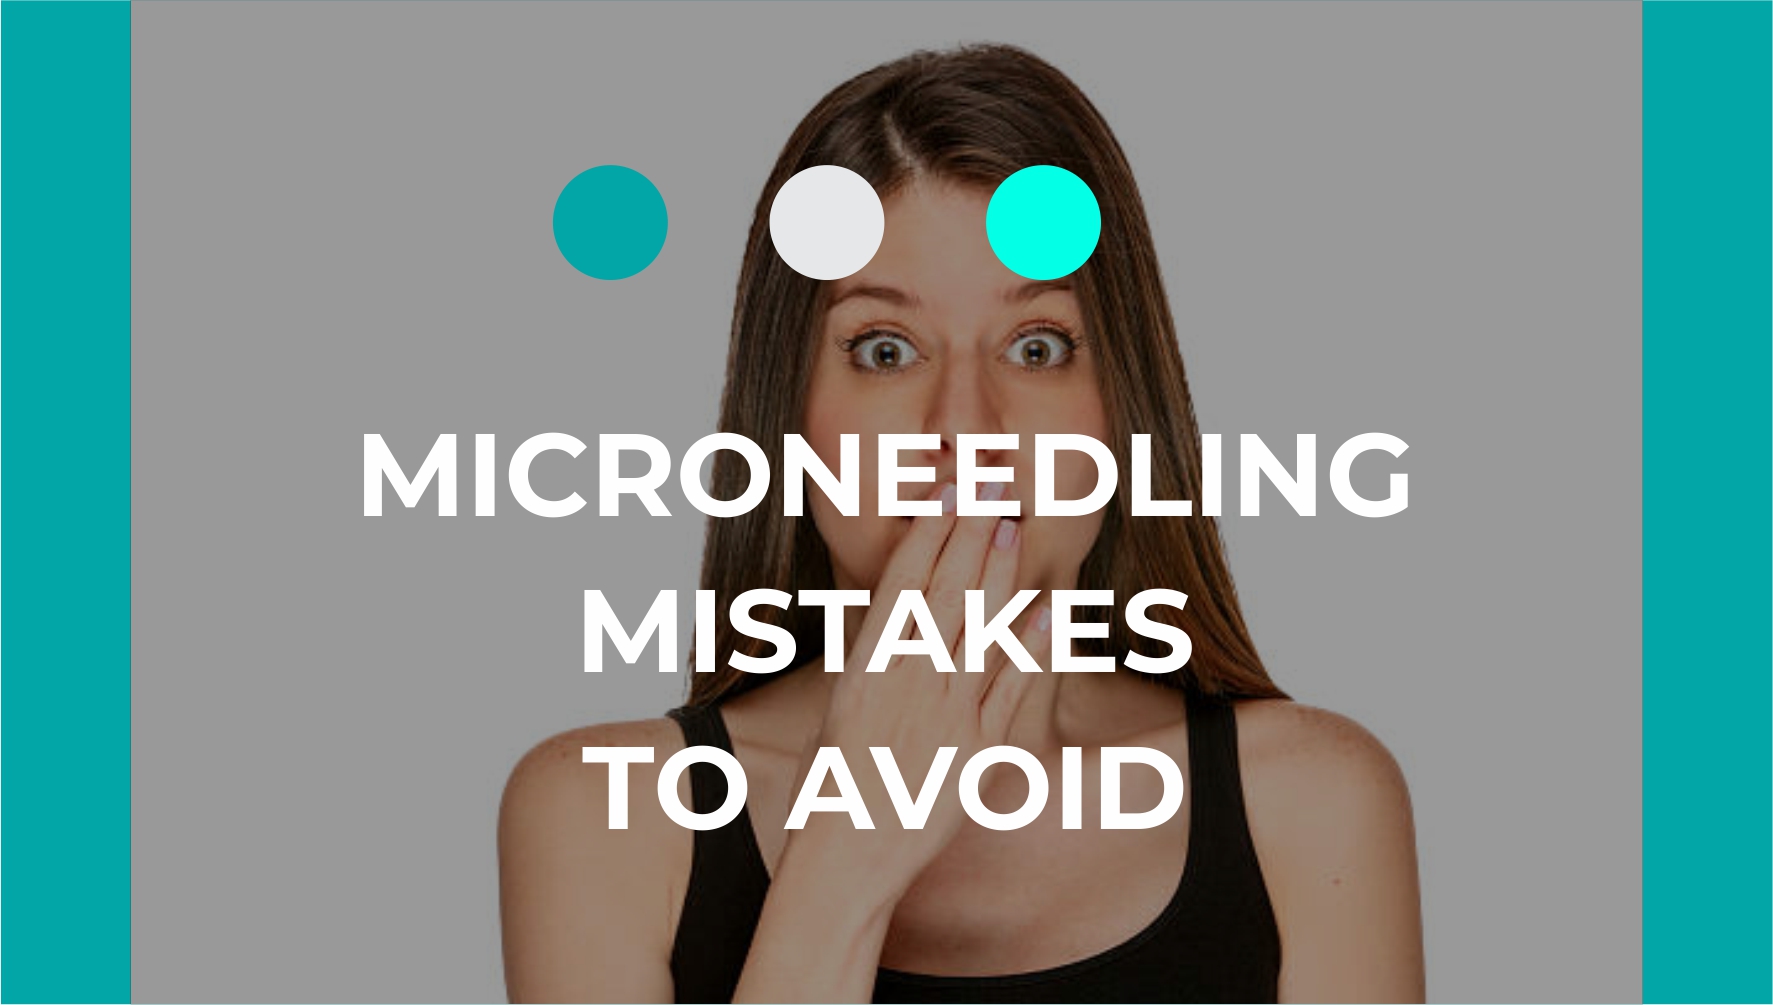 Microneedling Mistakes to Avoid